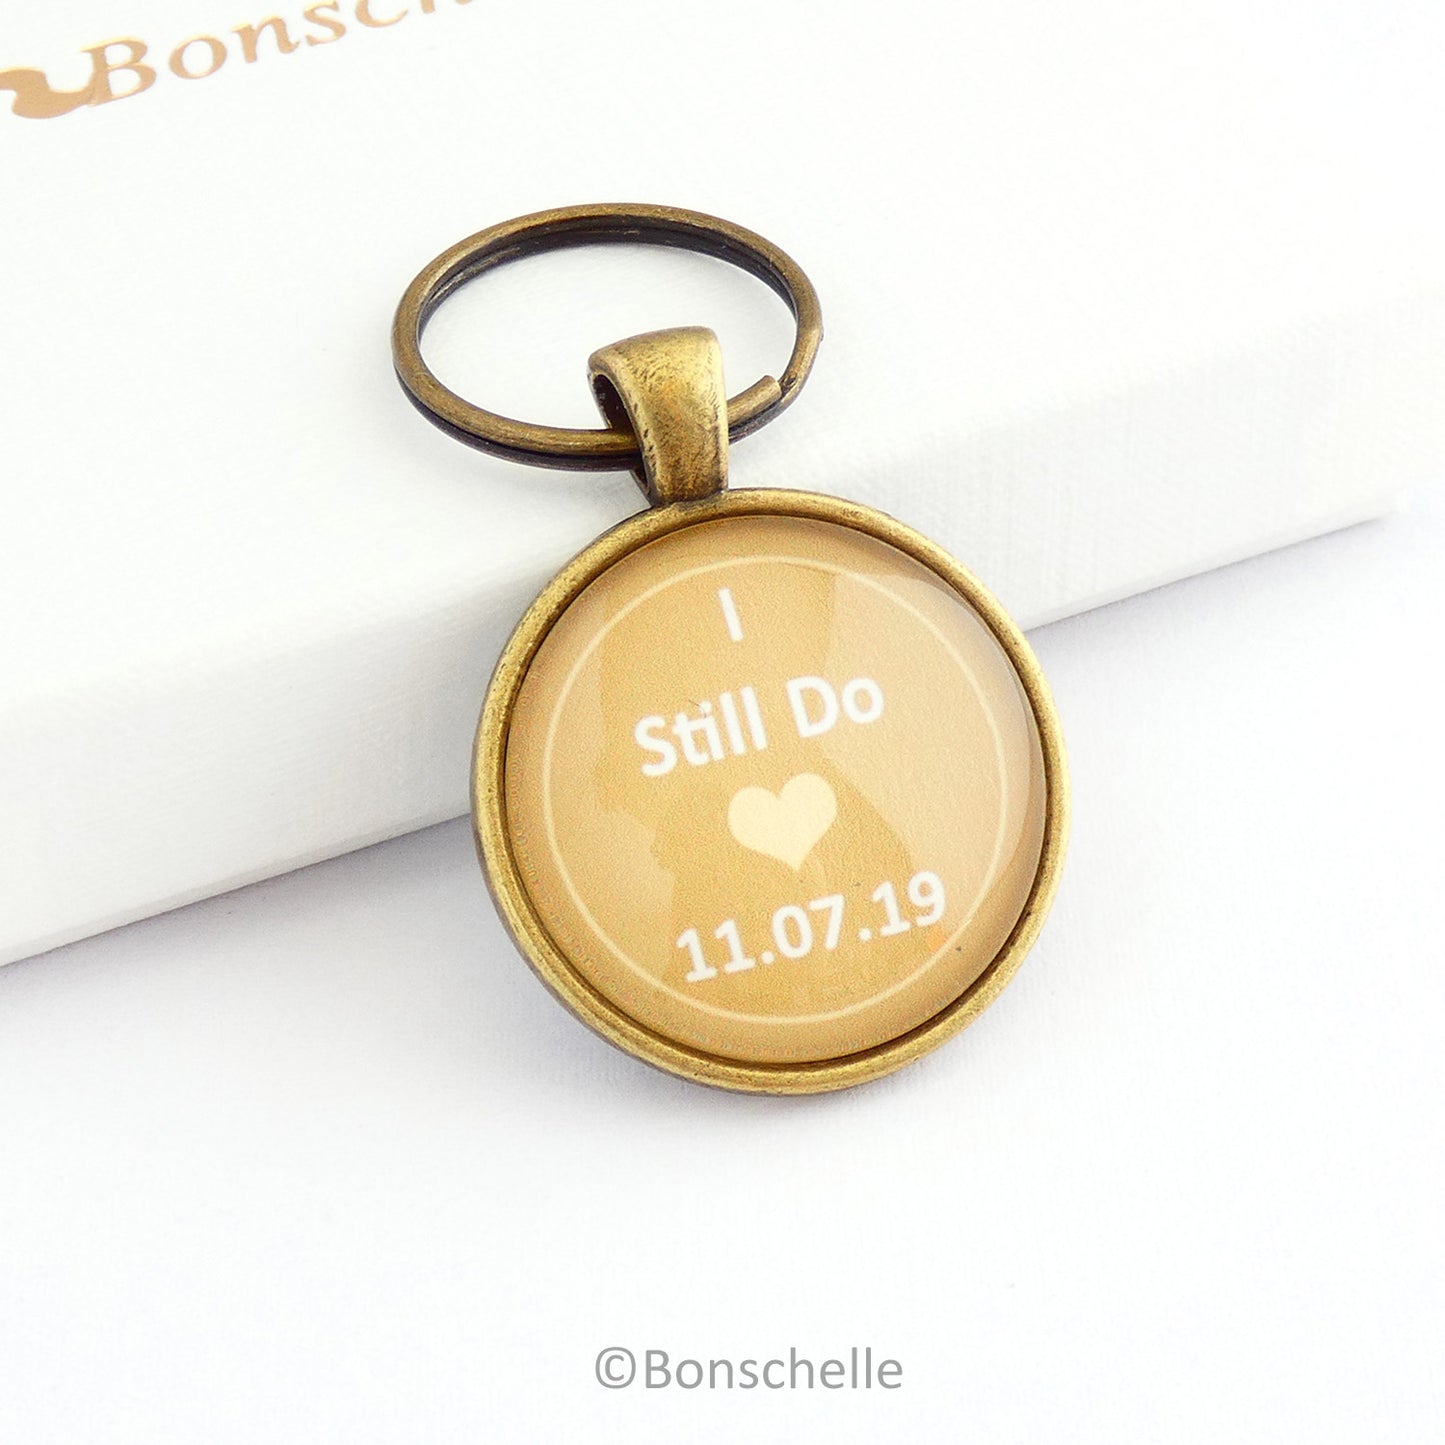 Round bronze toned wedding anniversary keyring gift with the words I still Do, a small heart and a custom date